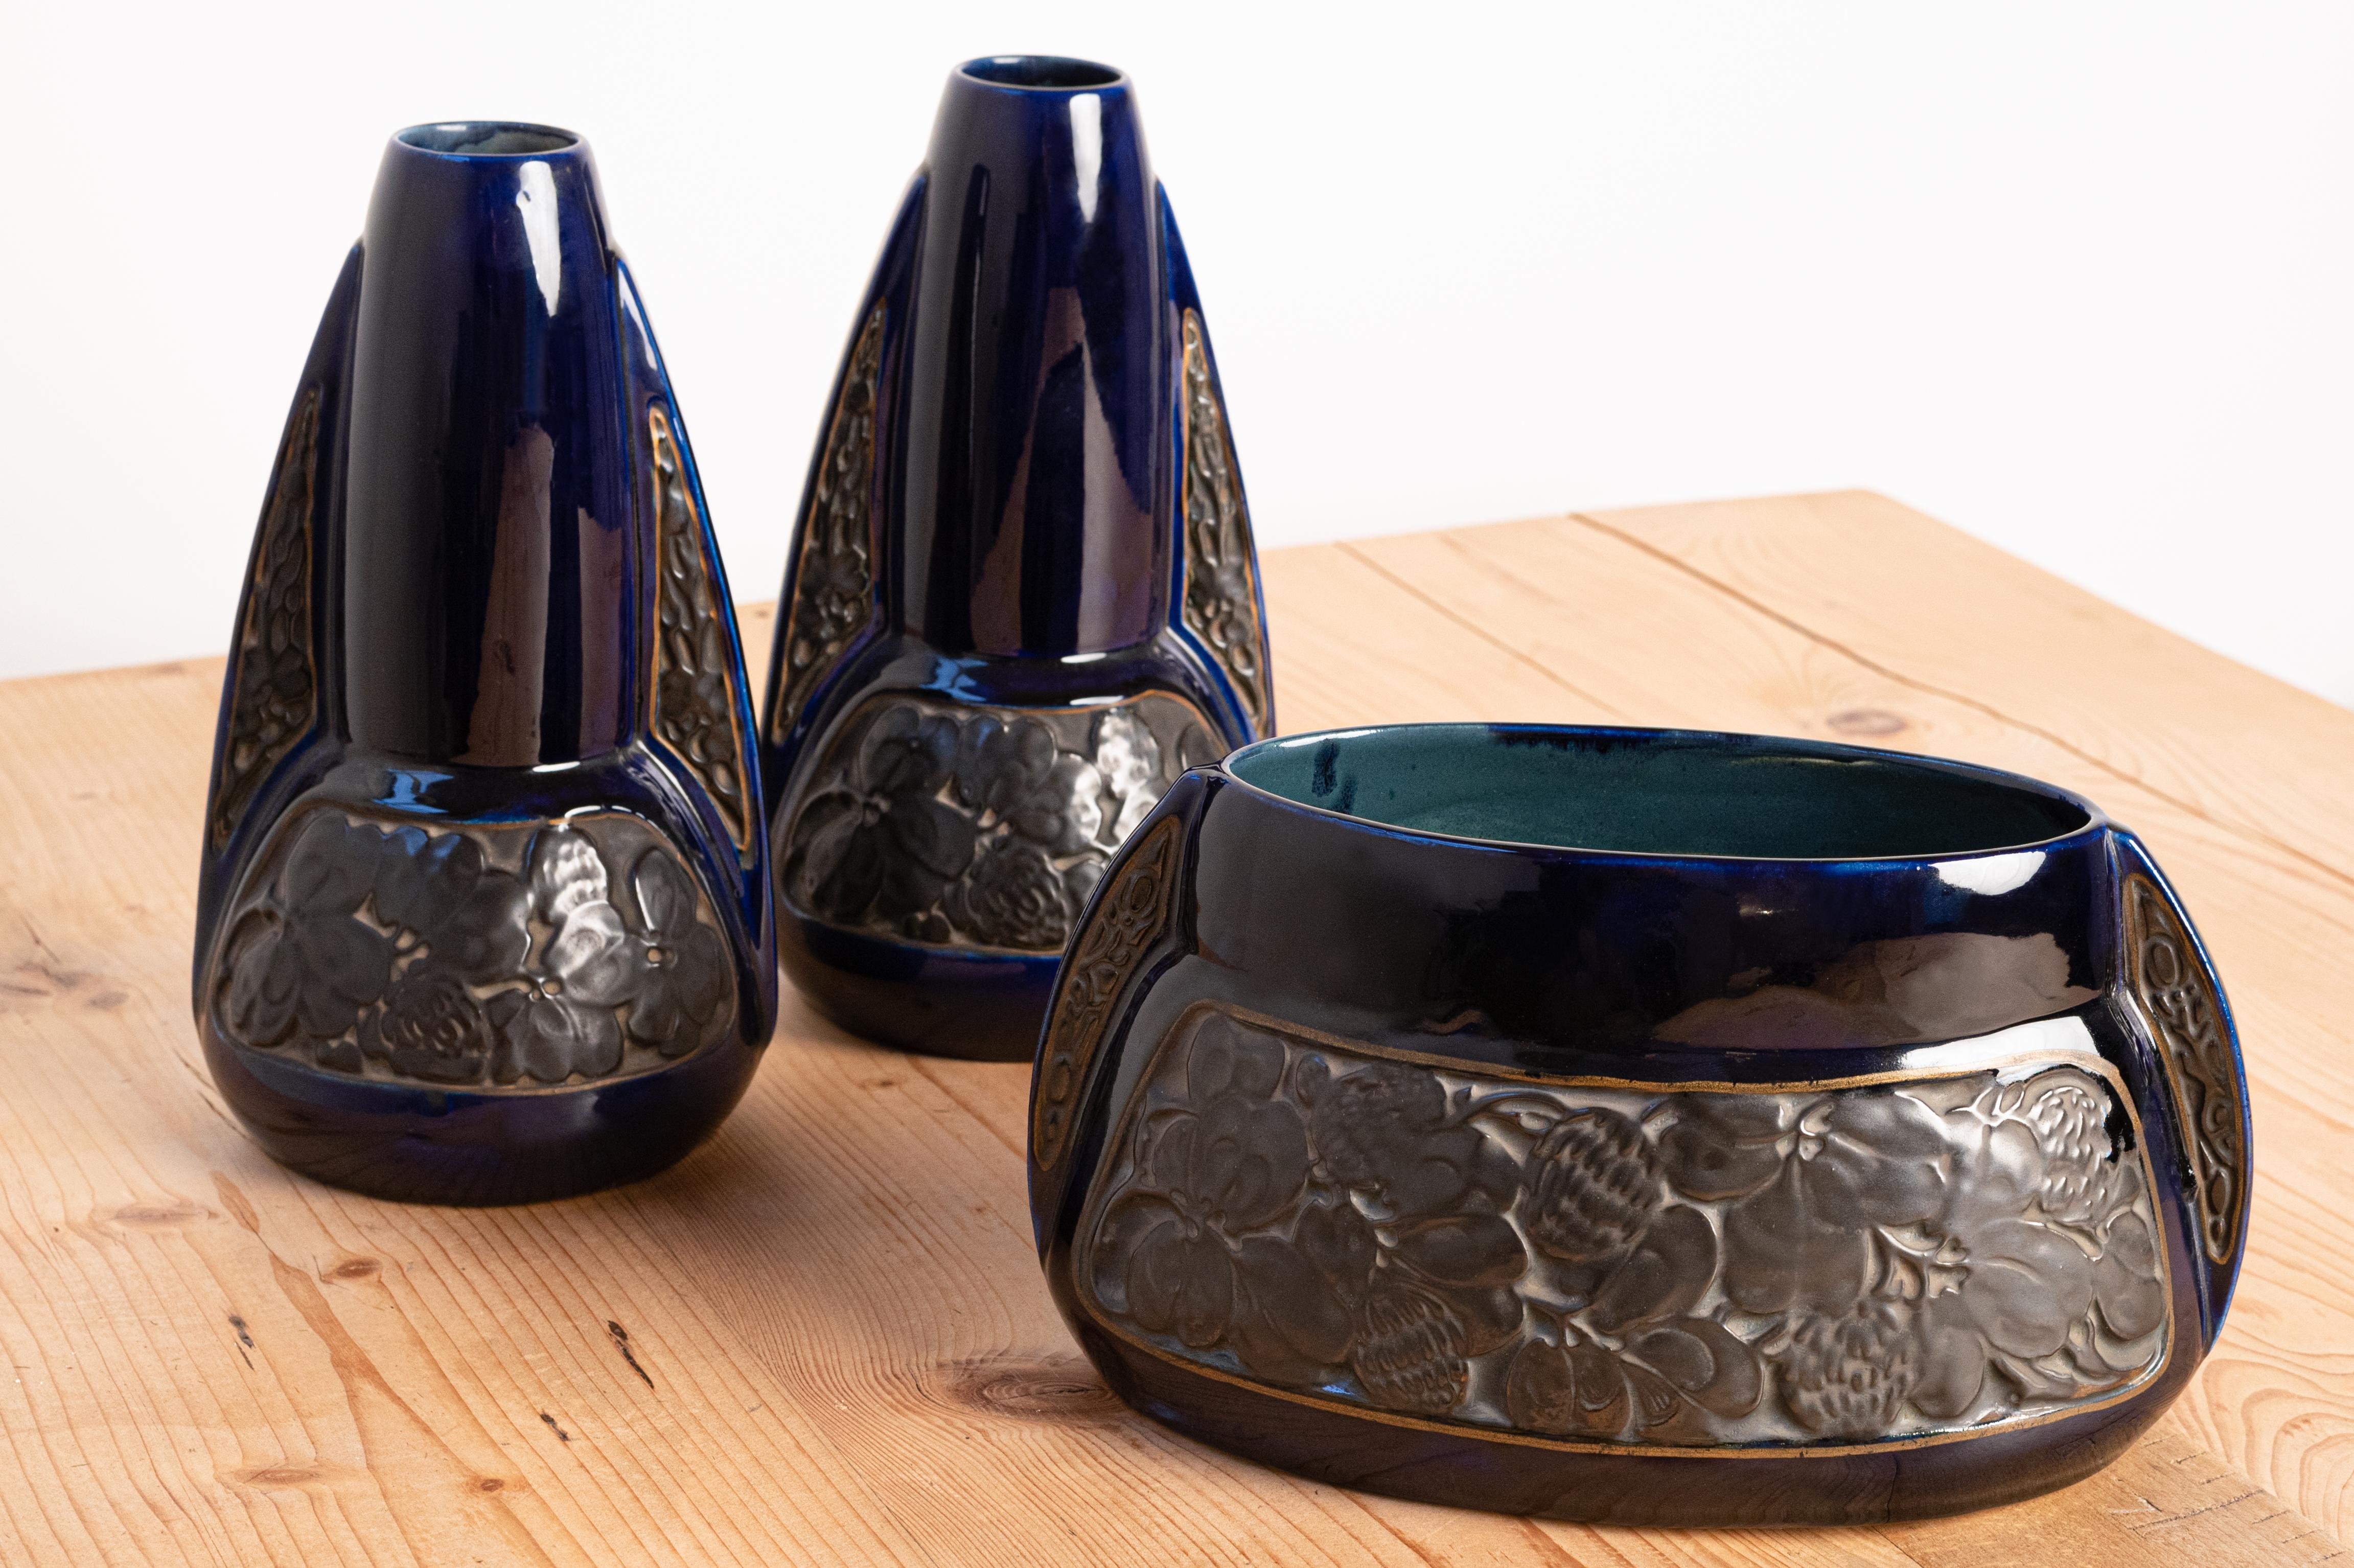 Art Deco Set of 3 mantlepiece objects, made by Manufacture de Gustave de Bruyn et fils (Fives-Lille), in the 1920/1930s. Ceramics in dark blue and matt black colour.